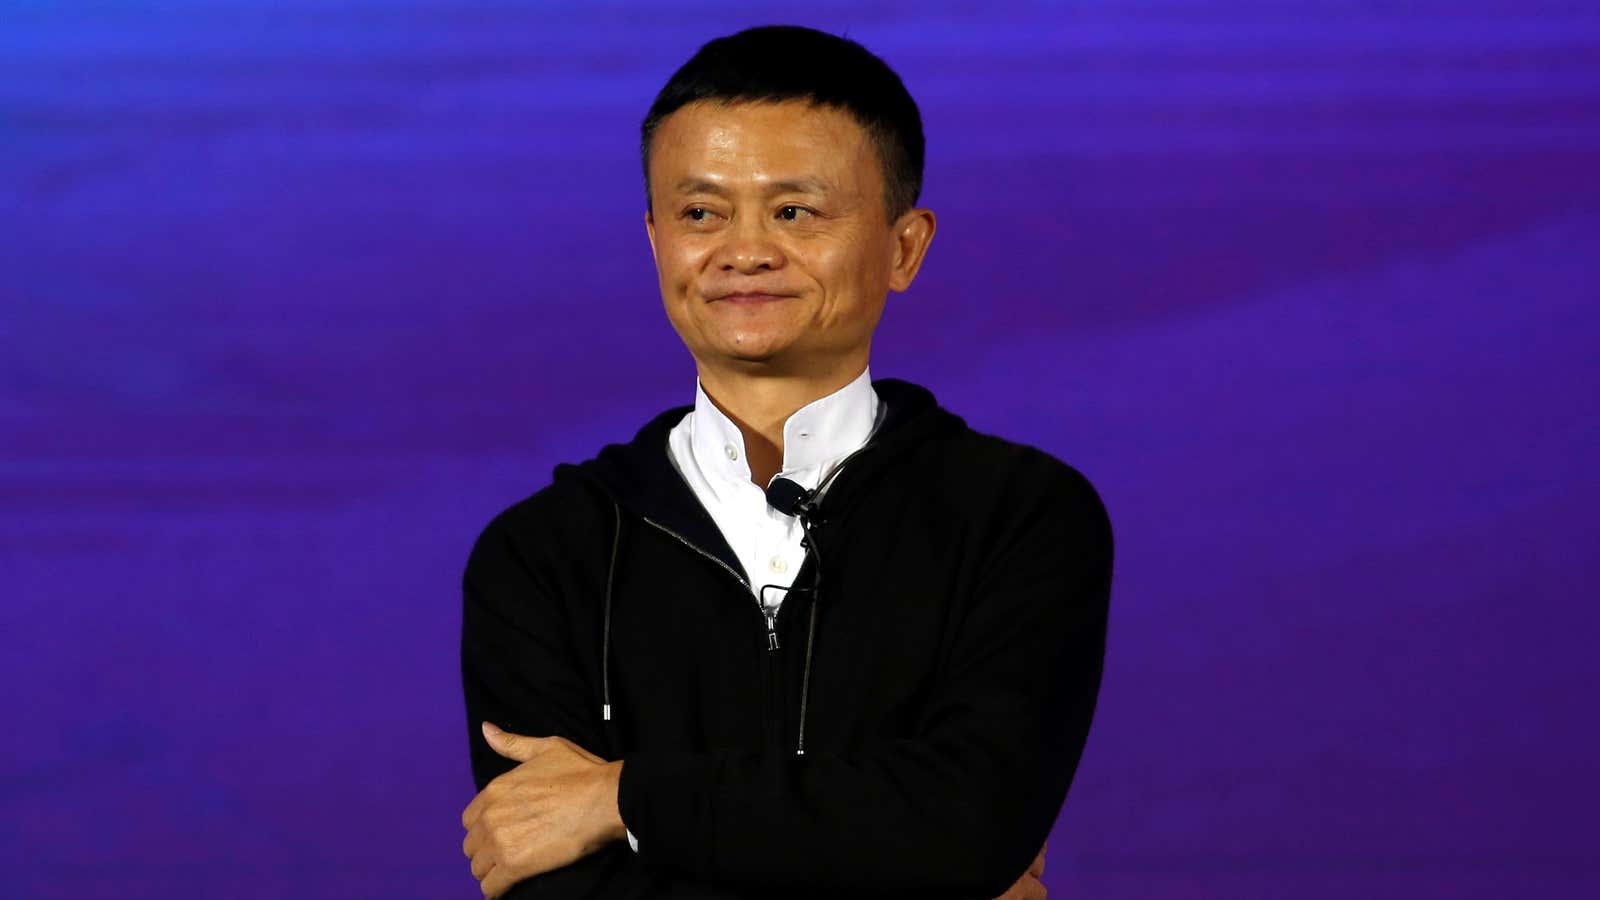 Alibaba founder Jack Ma can’t be happy about this one.